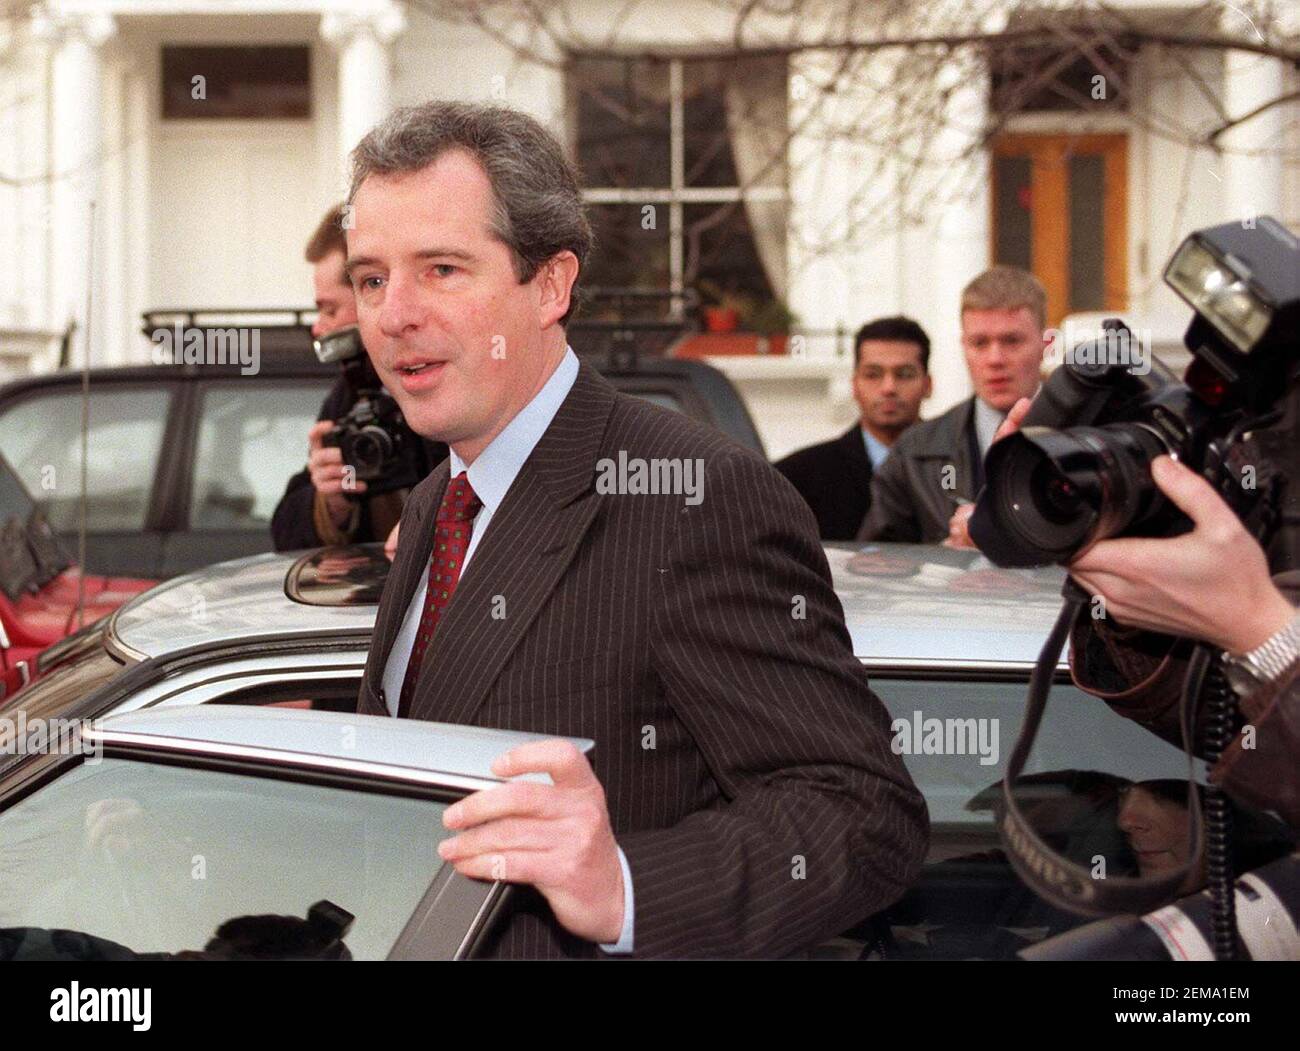 File photo dated 15/02/96 of Foreign Office minister William Waldegrave, who said 'propaganda' against Saddam Hussein, requested by the then prime minister Margaret Thatcher, was 'not difficult to come by', but he warned such a tactic would be likely to call into question why British companies had sold munitions to Iraq, despite the atrocities committed during Saddam's reign. Stock Photo